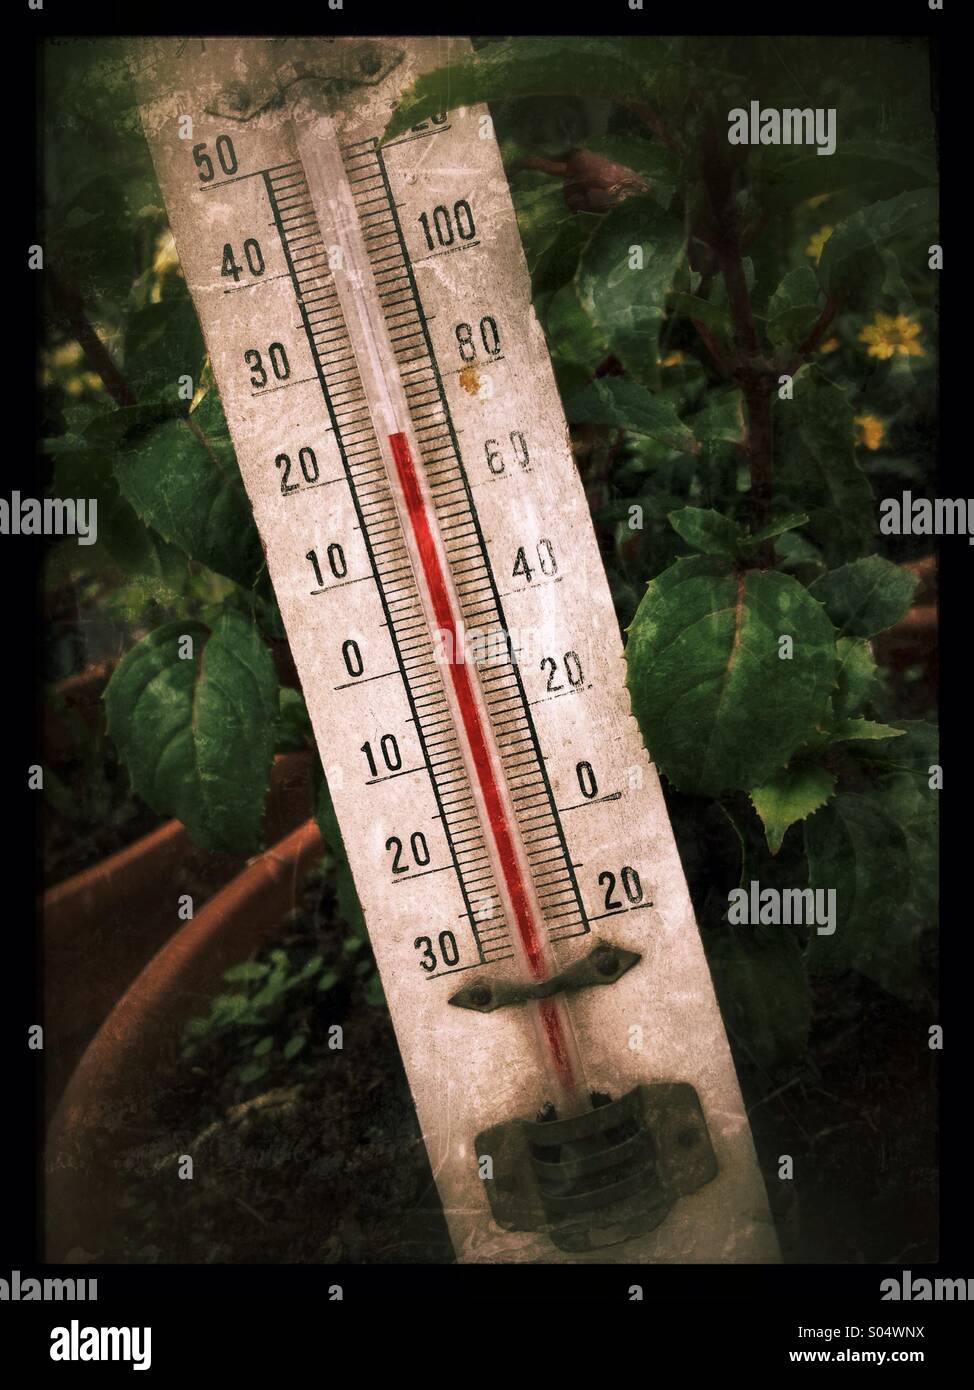 Thermometer Inside Plant Nursery Stock Photo - Download Image Now